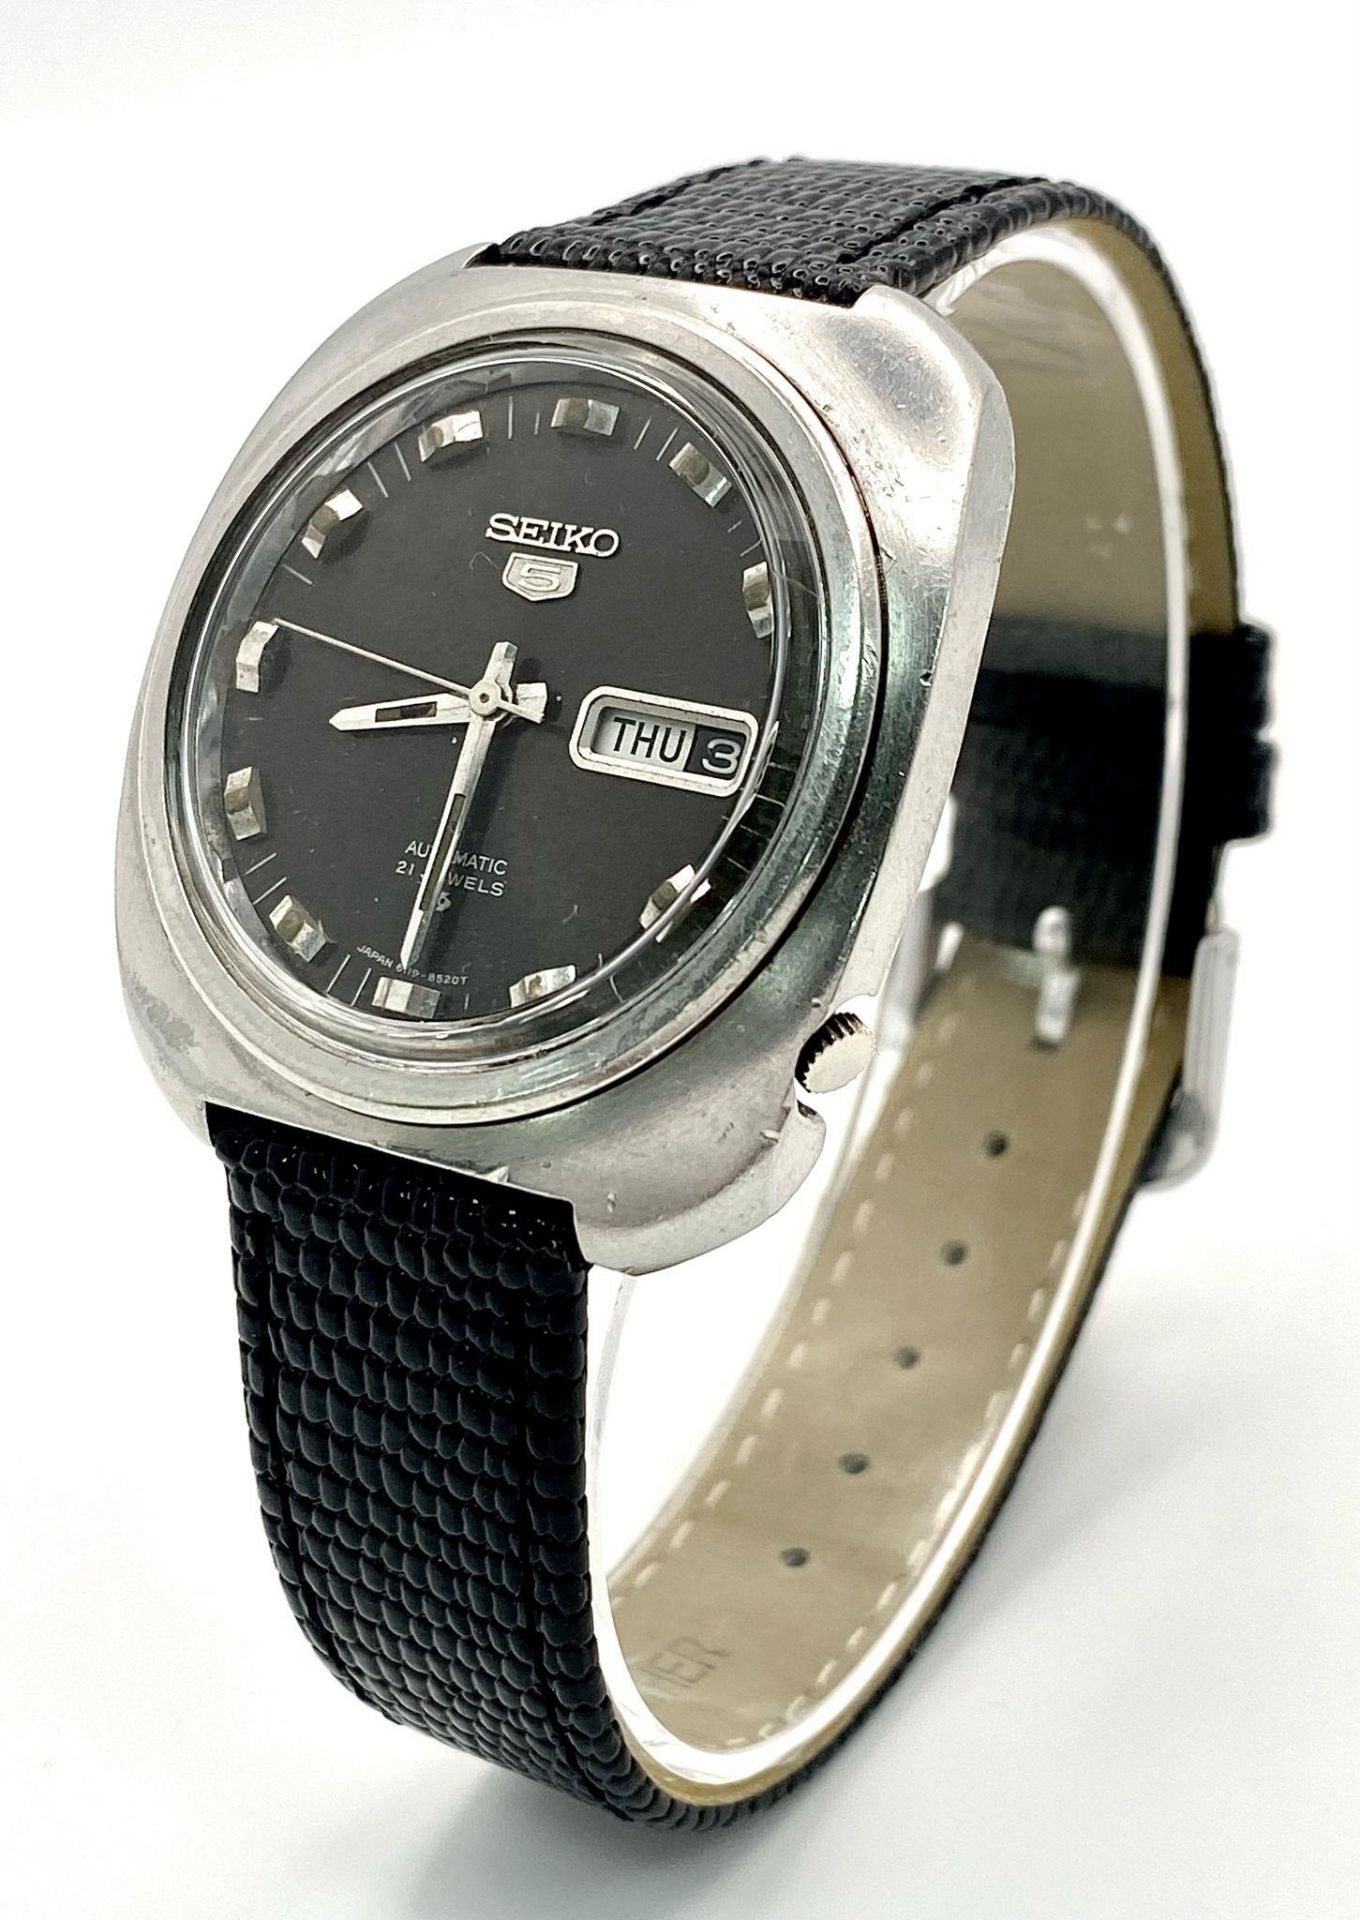 A Vintage Seiko 5 Automatic Gents Watch. Stainless steel case - 38mm. 21 jewels. Black dial with